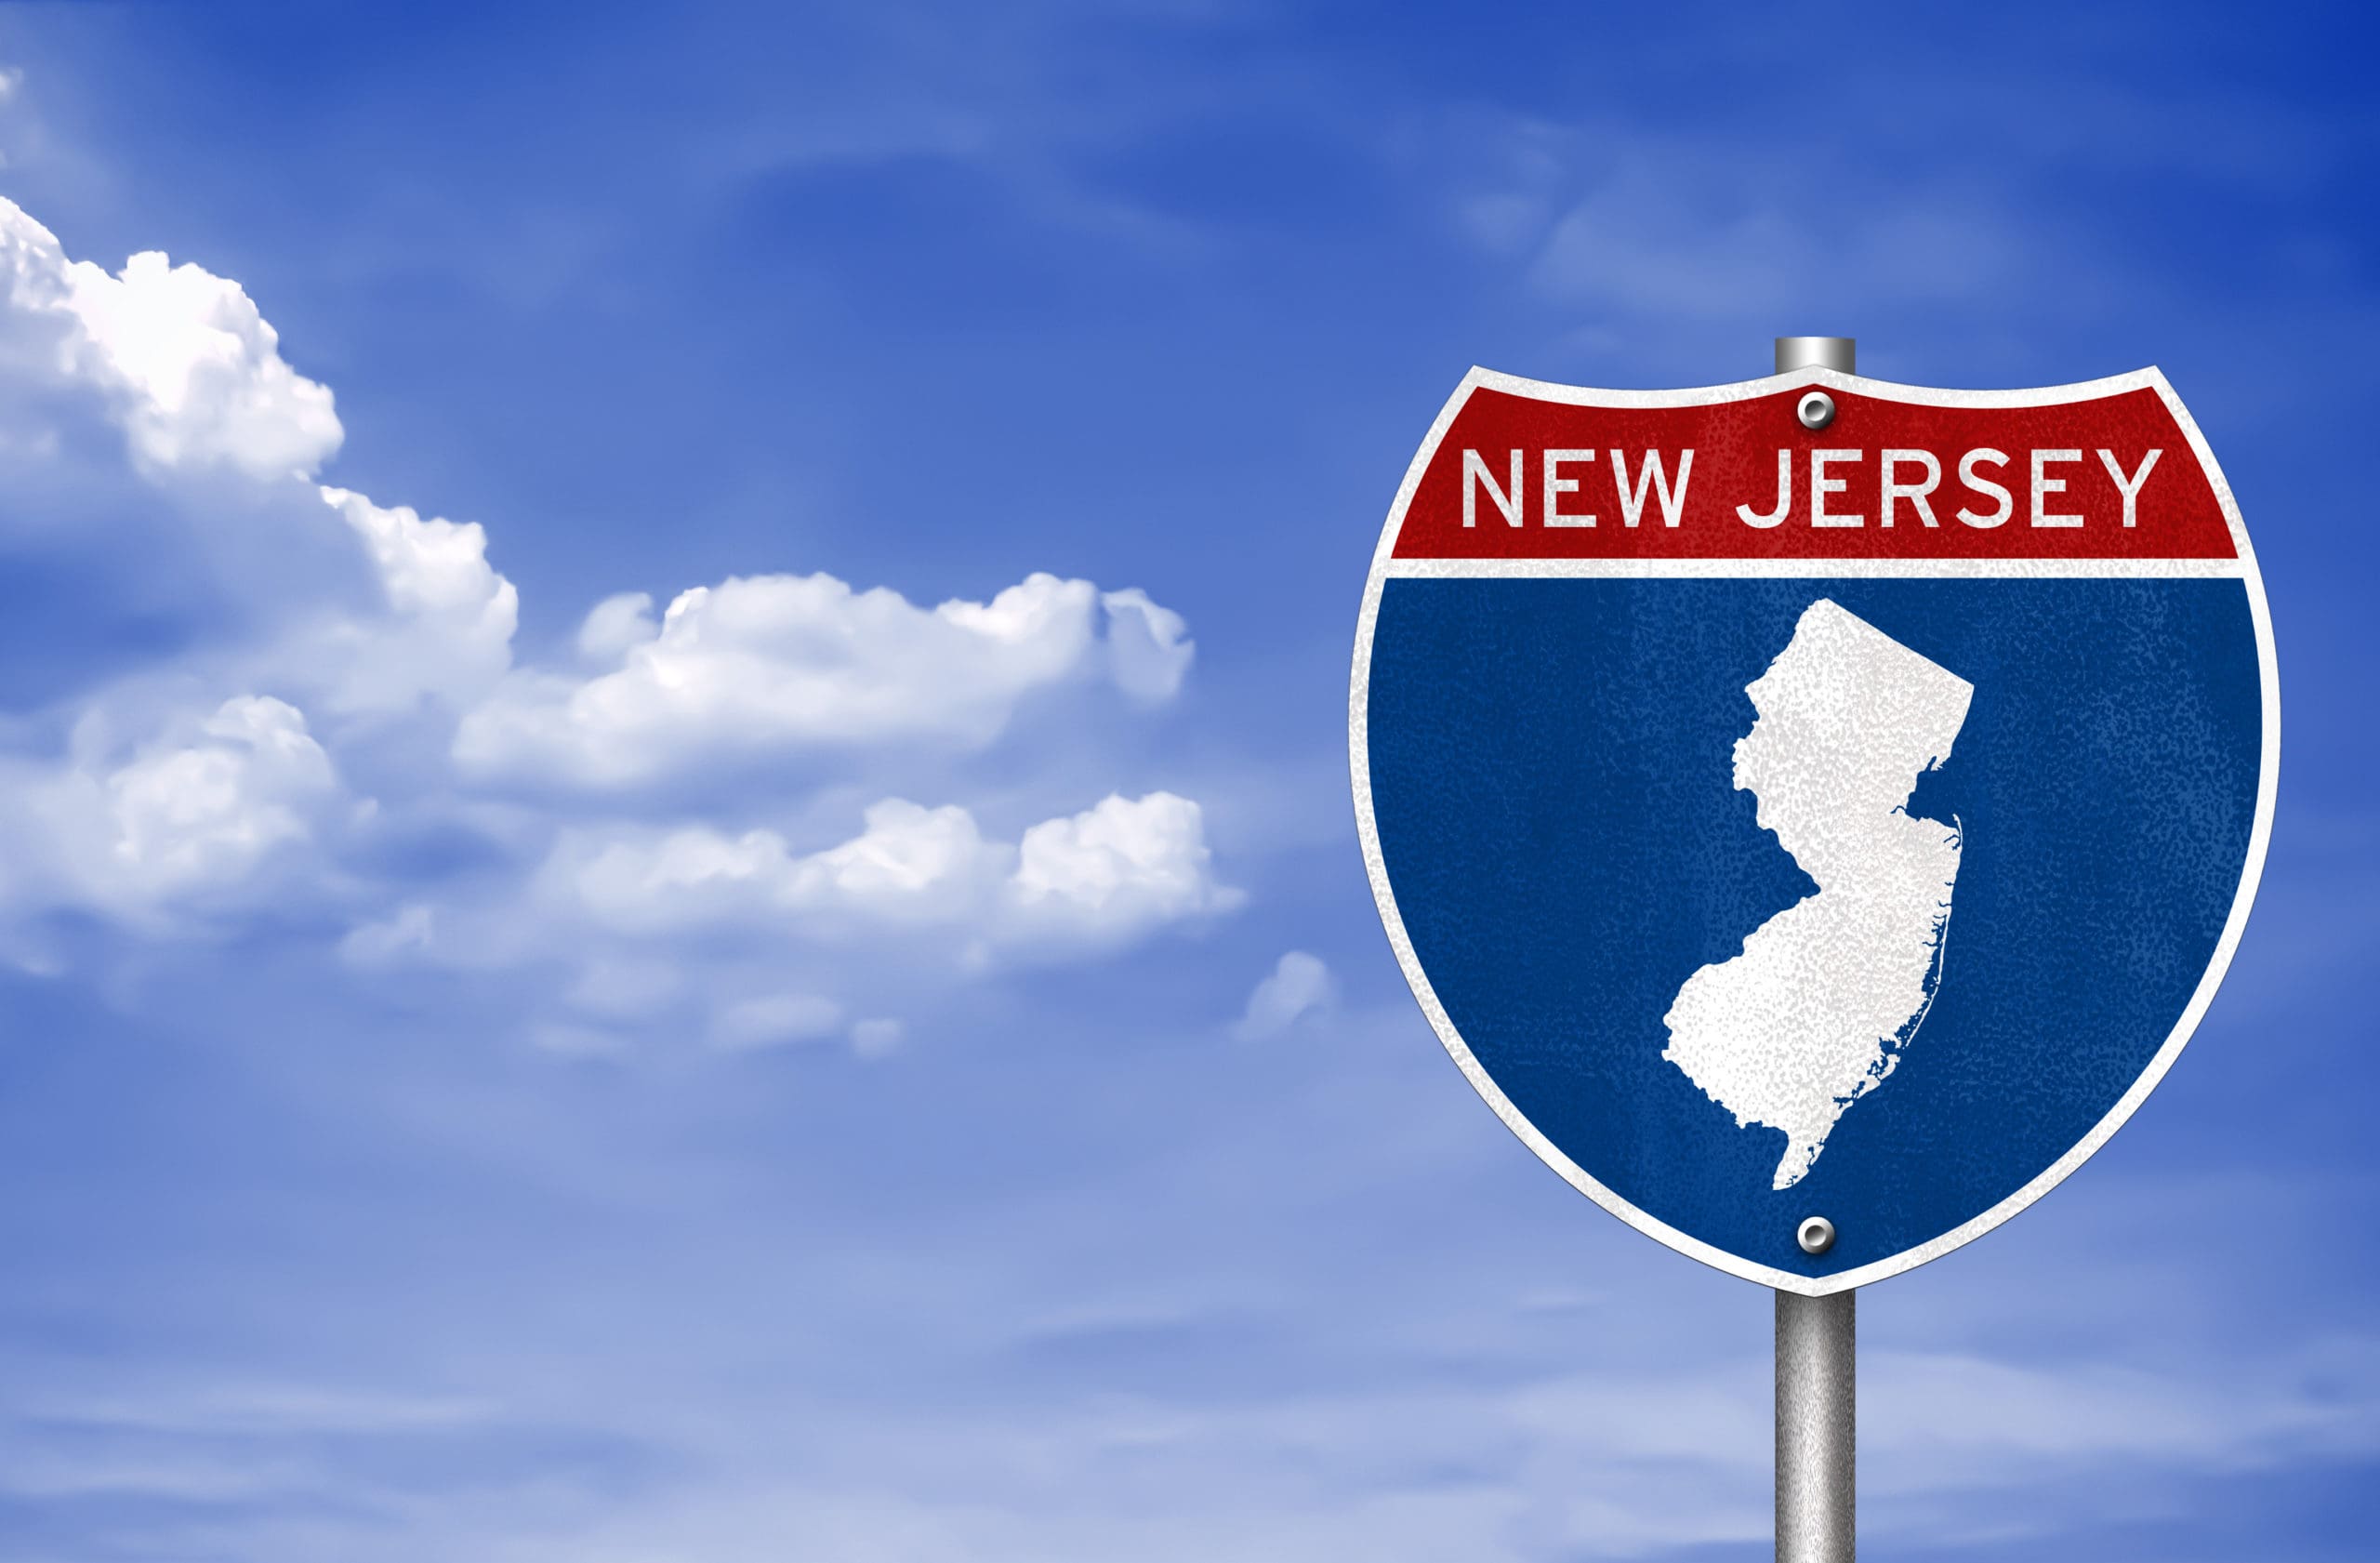 A new jersey road sign with a blue sky in the background.